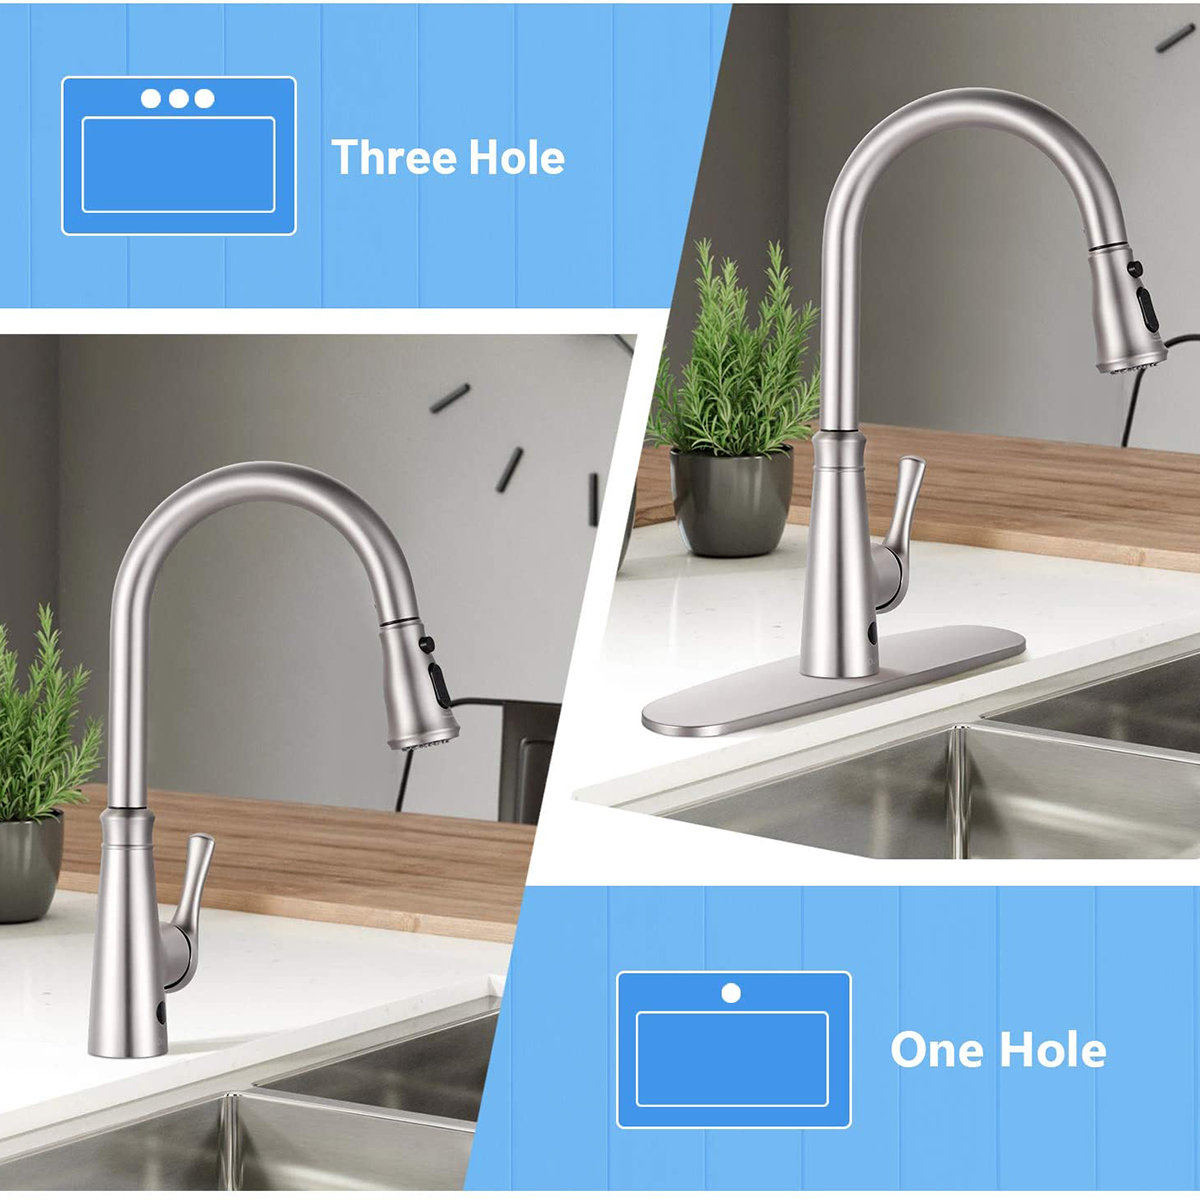 Aquacubic cUPC Modern Design Sensor Touchless Kitchen Faucet with 2 Function Pull Down Sprayer